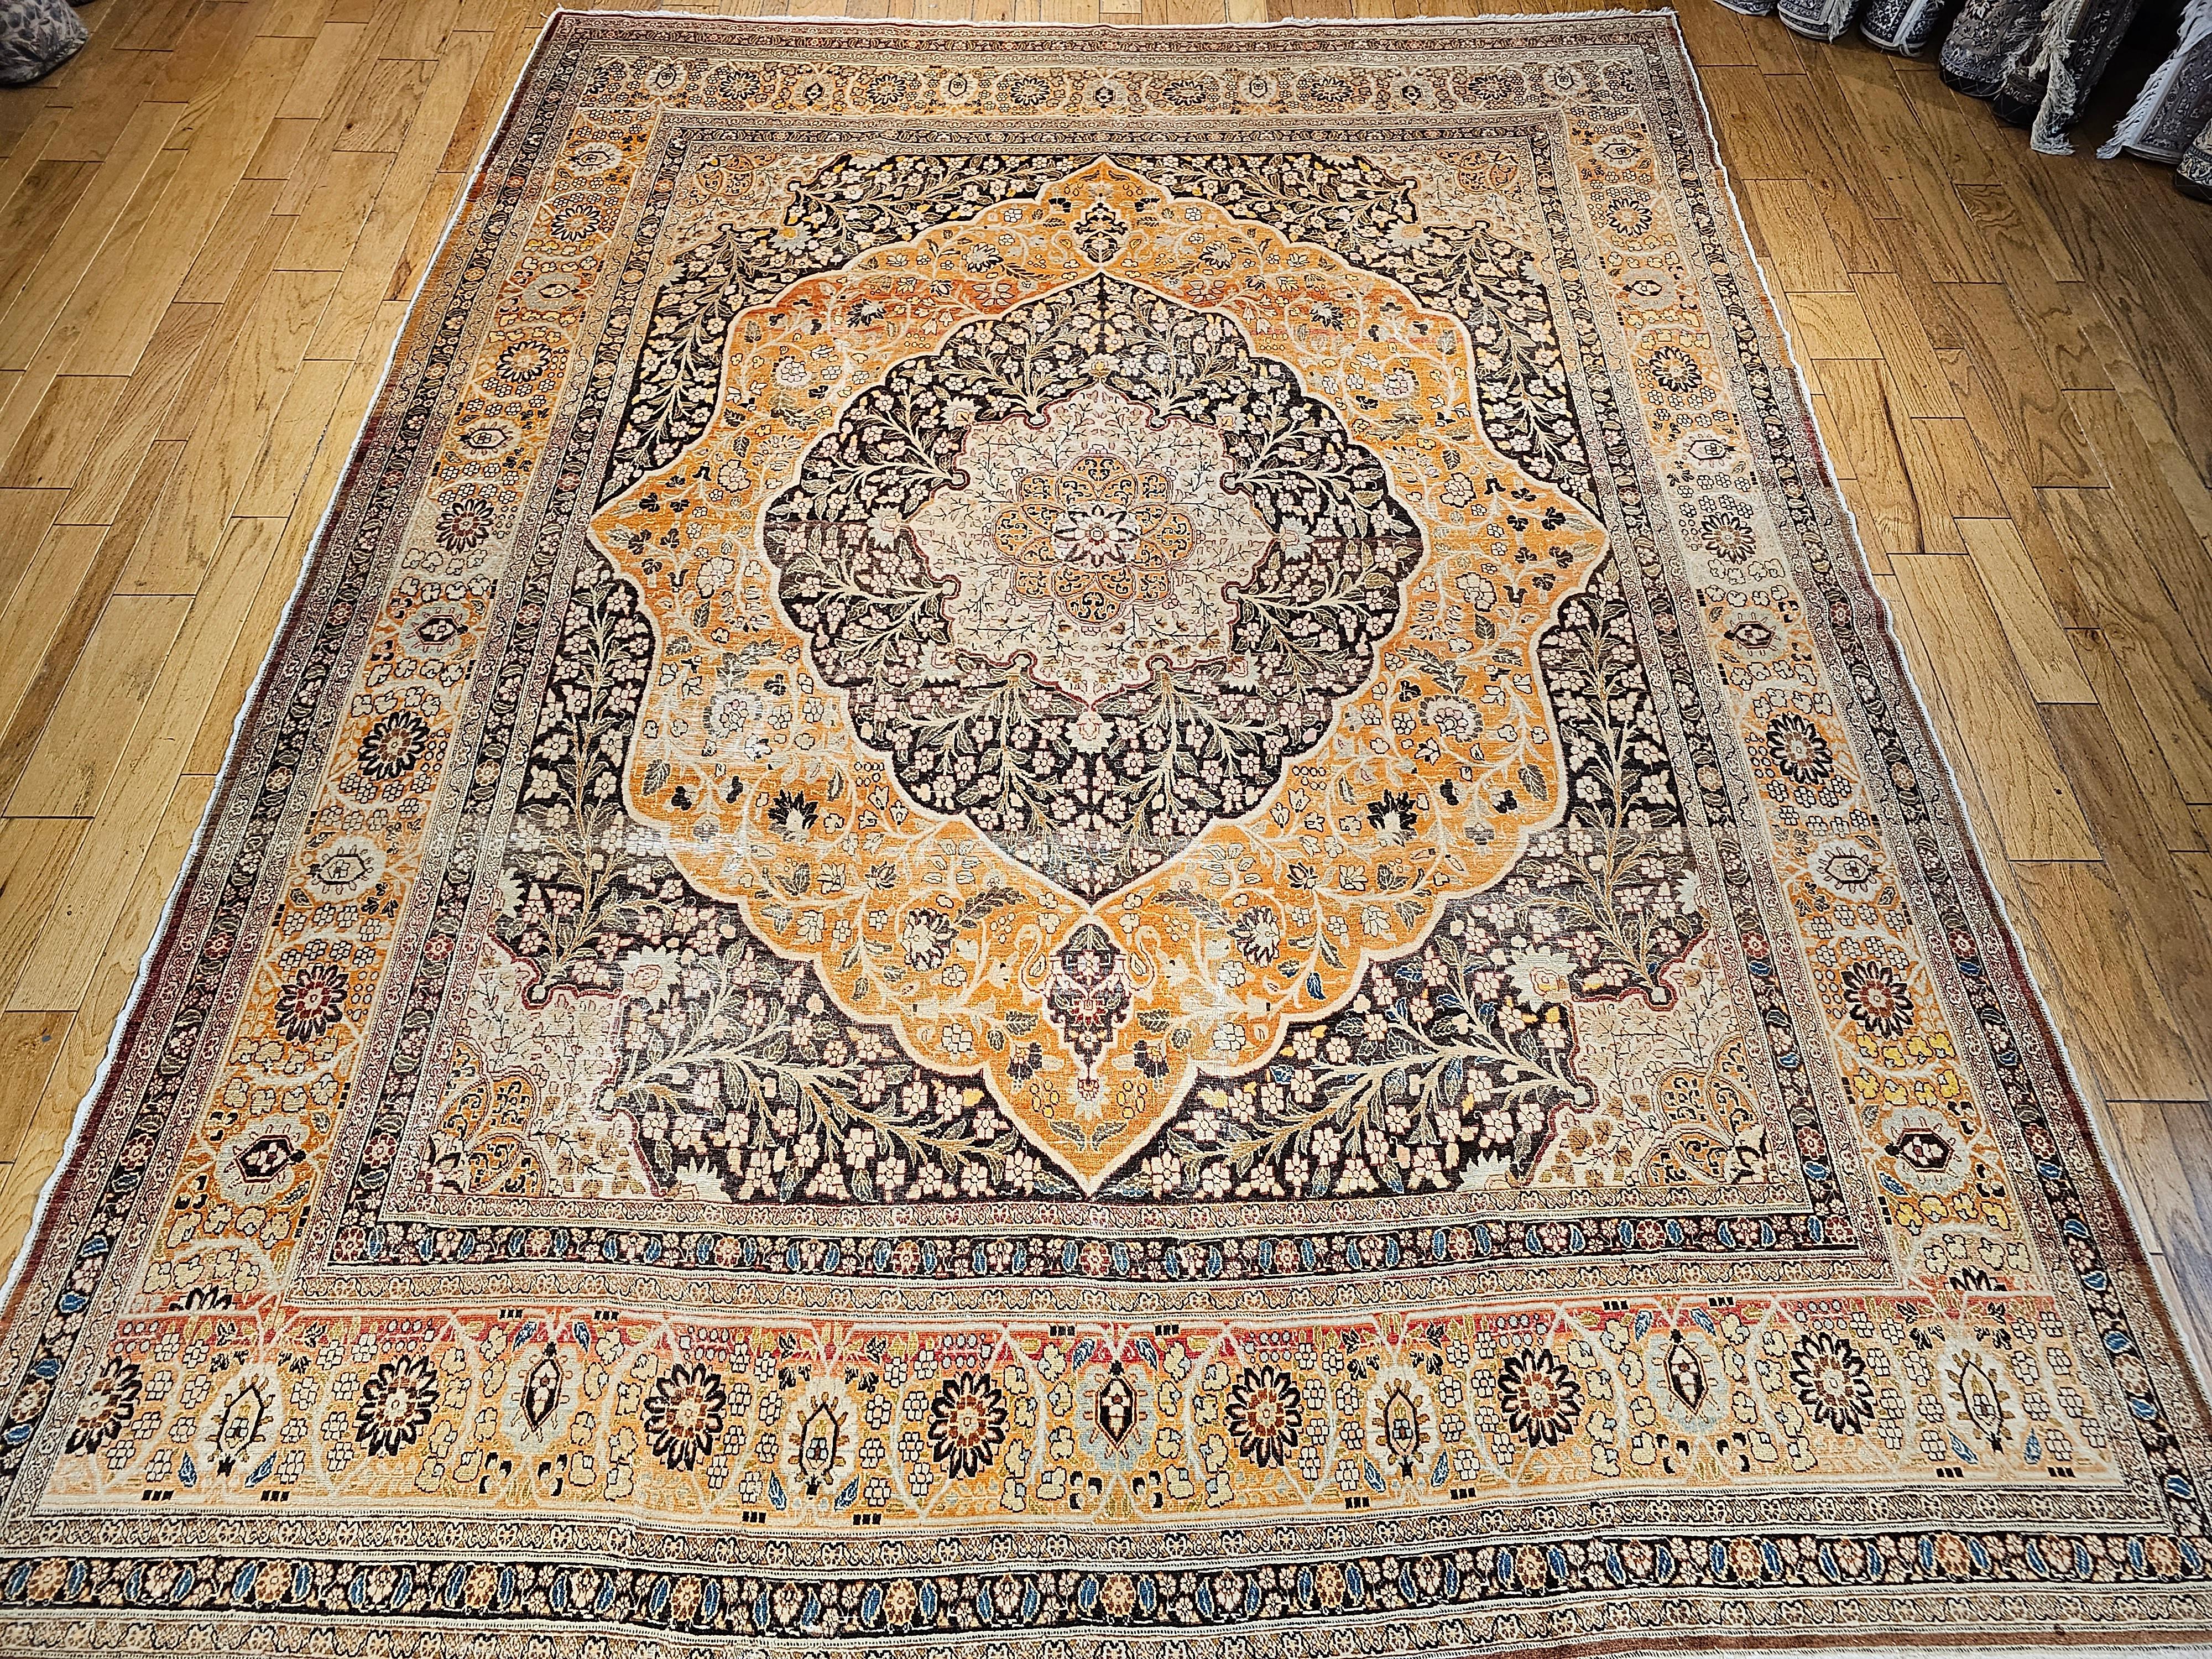 Wonderful vintage floral Tabriz from the early 1900s.  This inspiring Tabriz oversize rug reflects the style of Haji Jalili, the world-renowned 19th-century master weaver from Tabriz, Persia.  This Tabriz rug has a sophisticated vines design set in